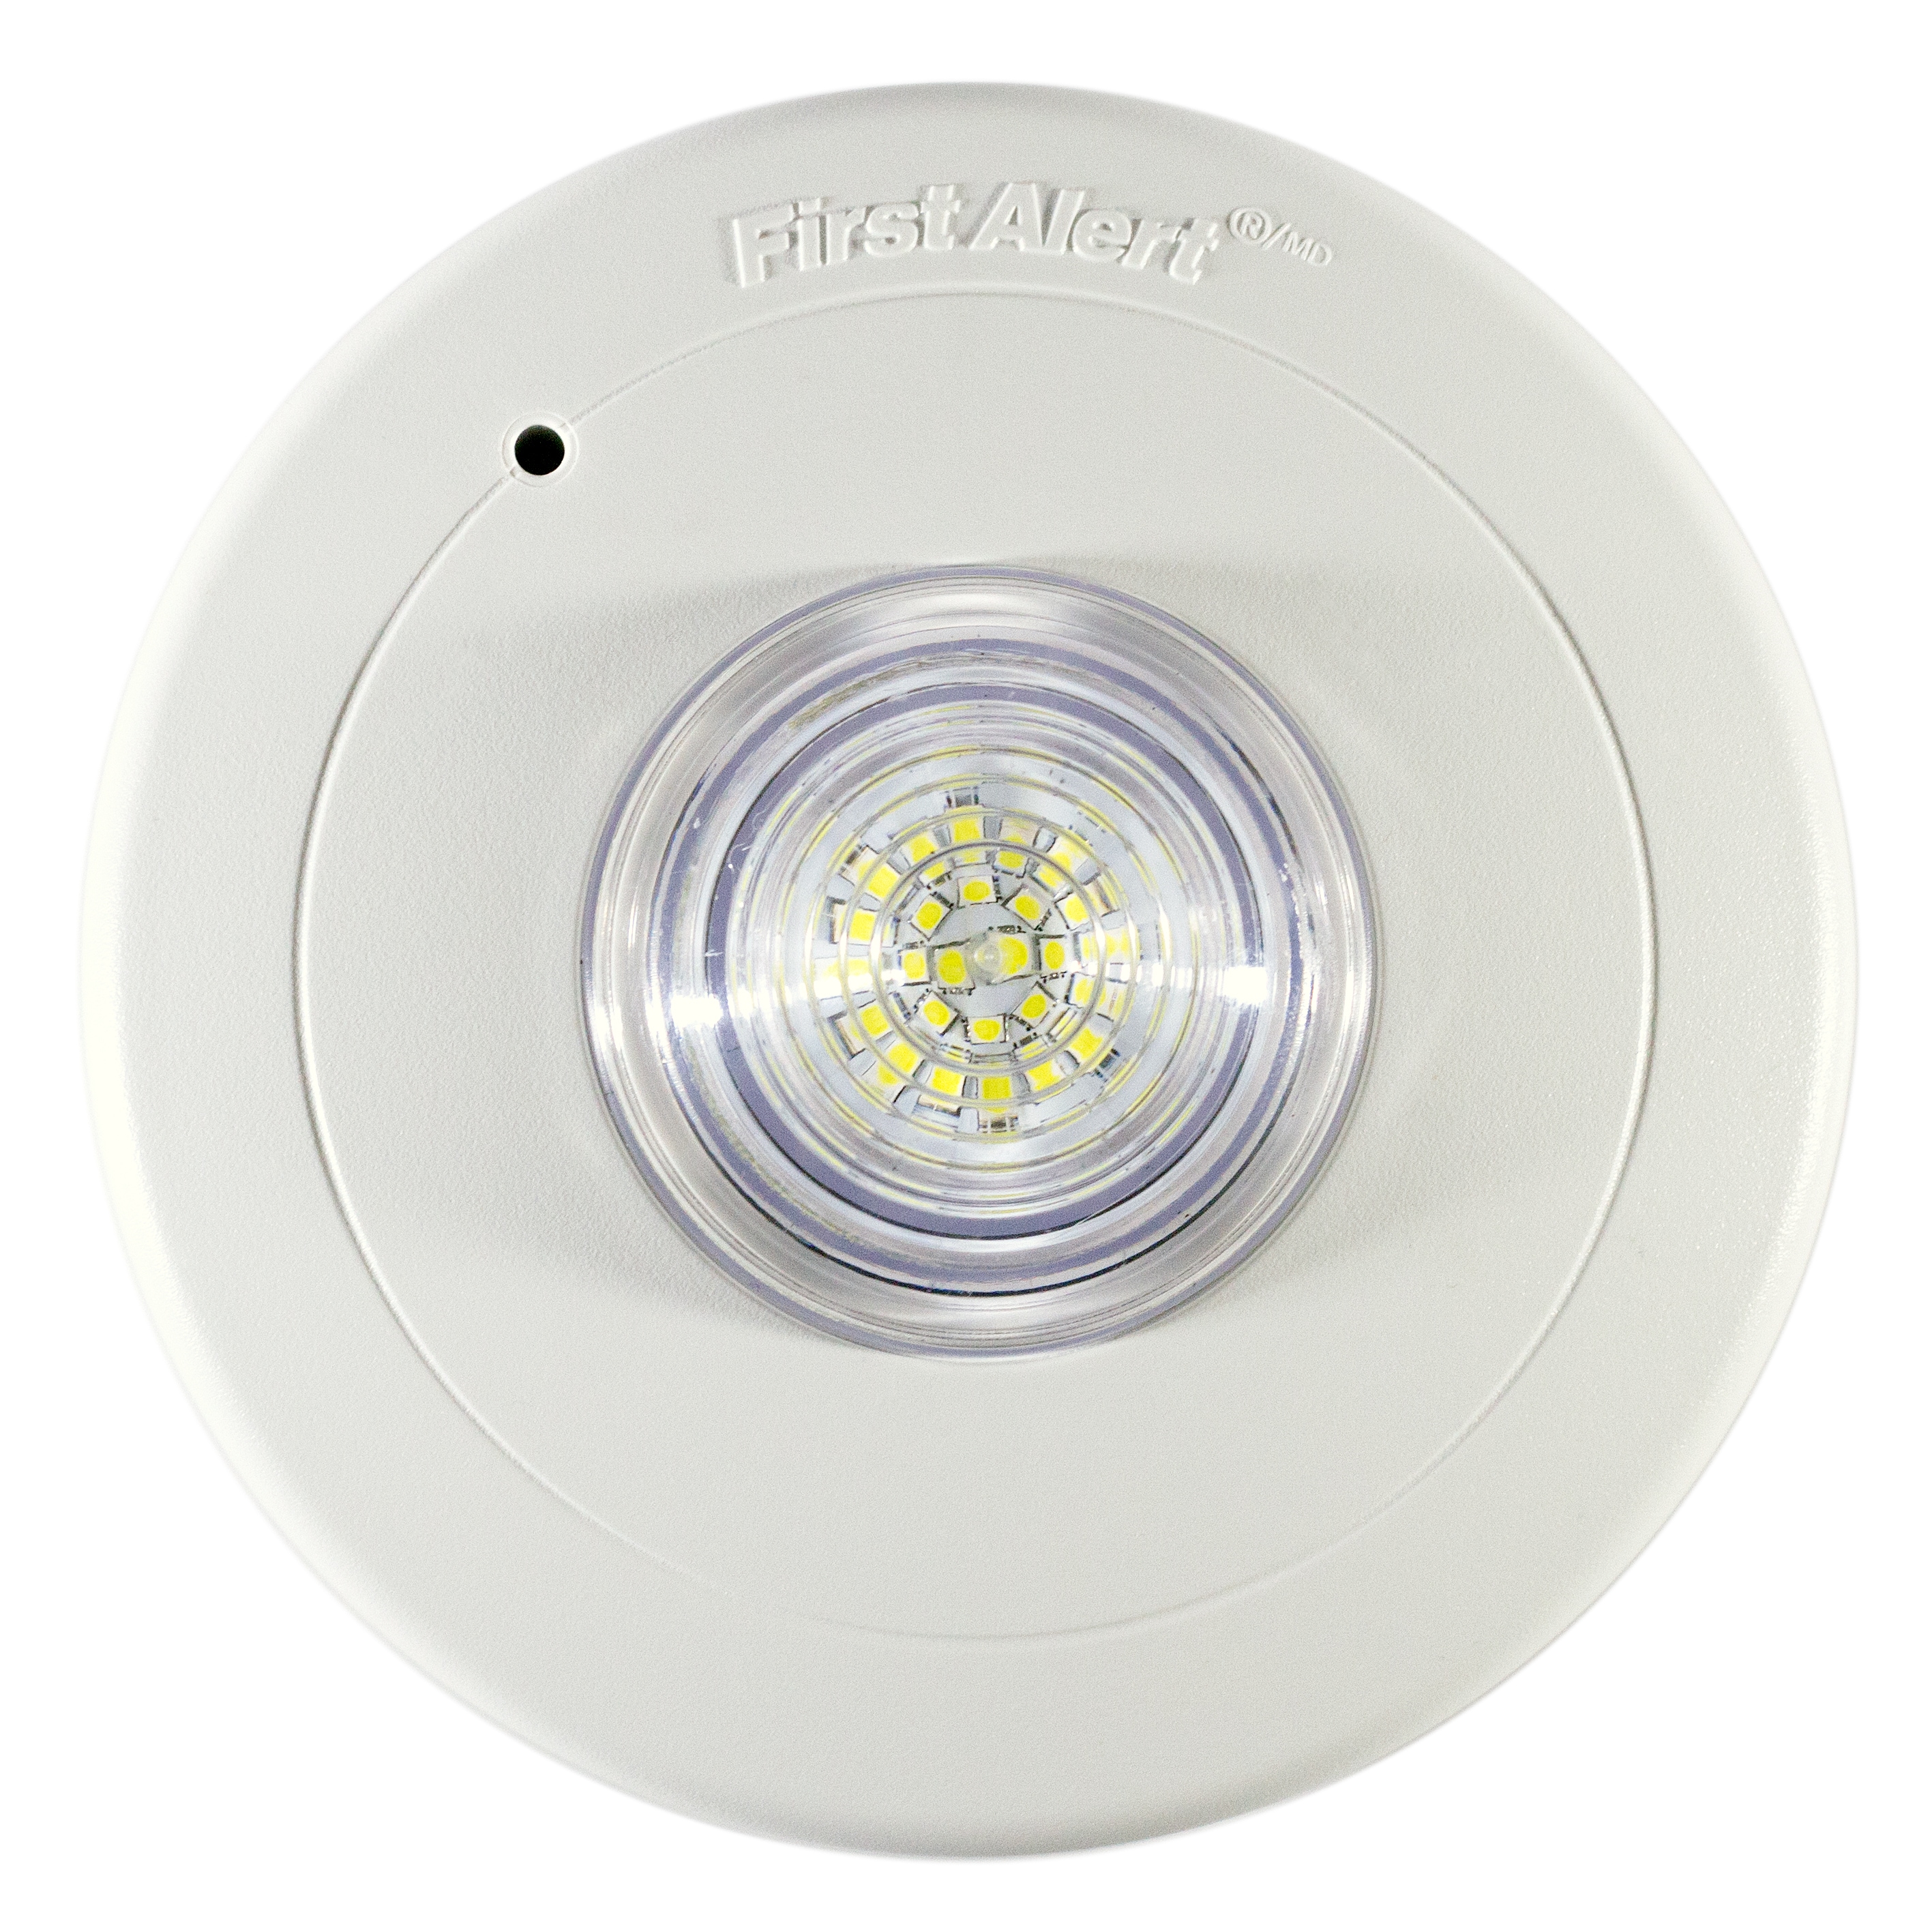 SITERLINK Smoke Detectors Battery Operated, Smoke Alarm with Test-Silence  Button, Photoelectric Sensor Fire Alarms Smoke Detectors with LED Lights,  UL